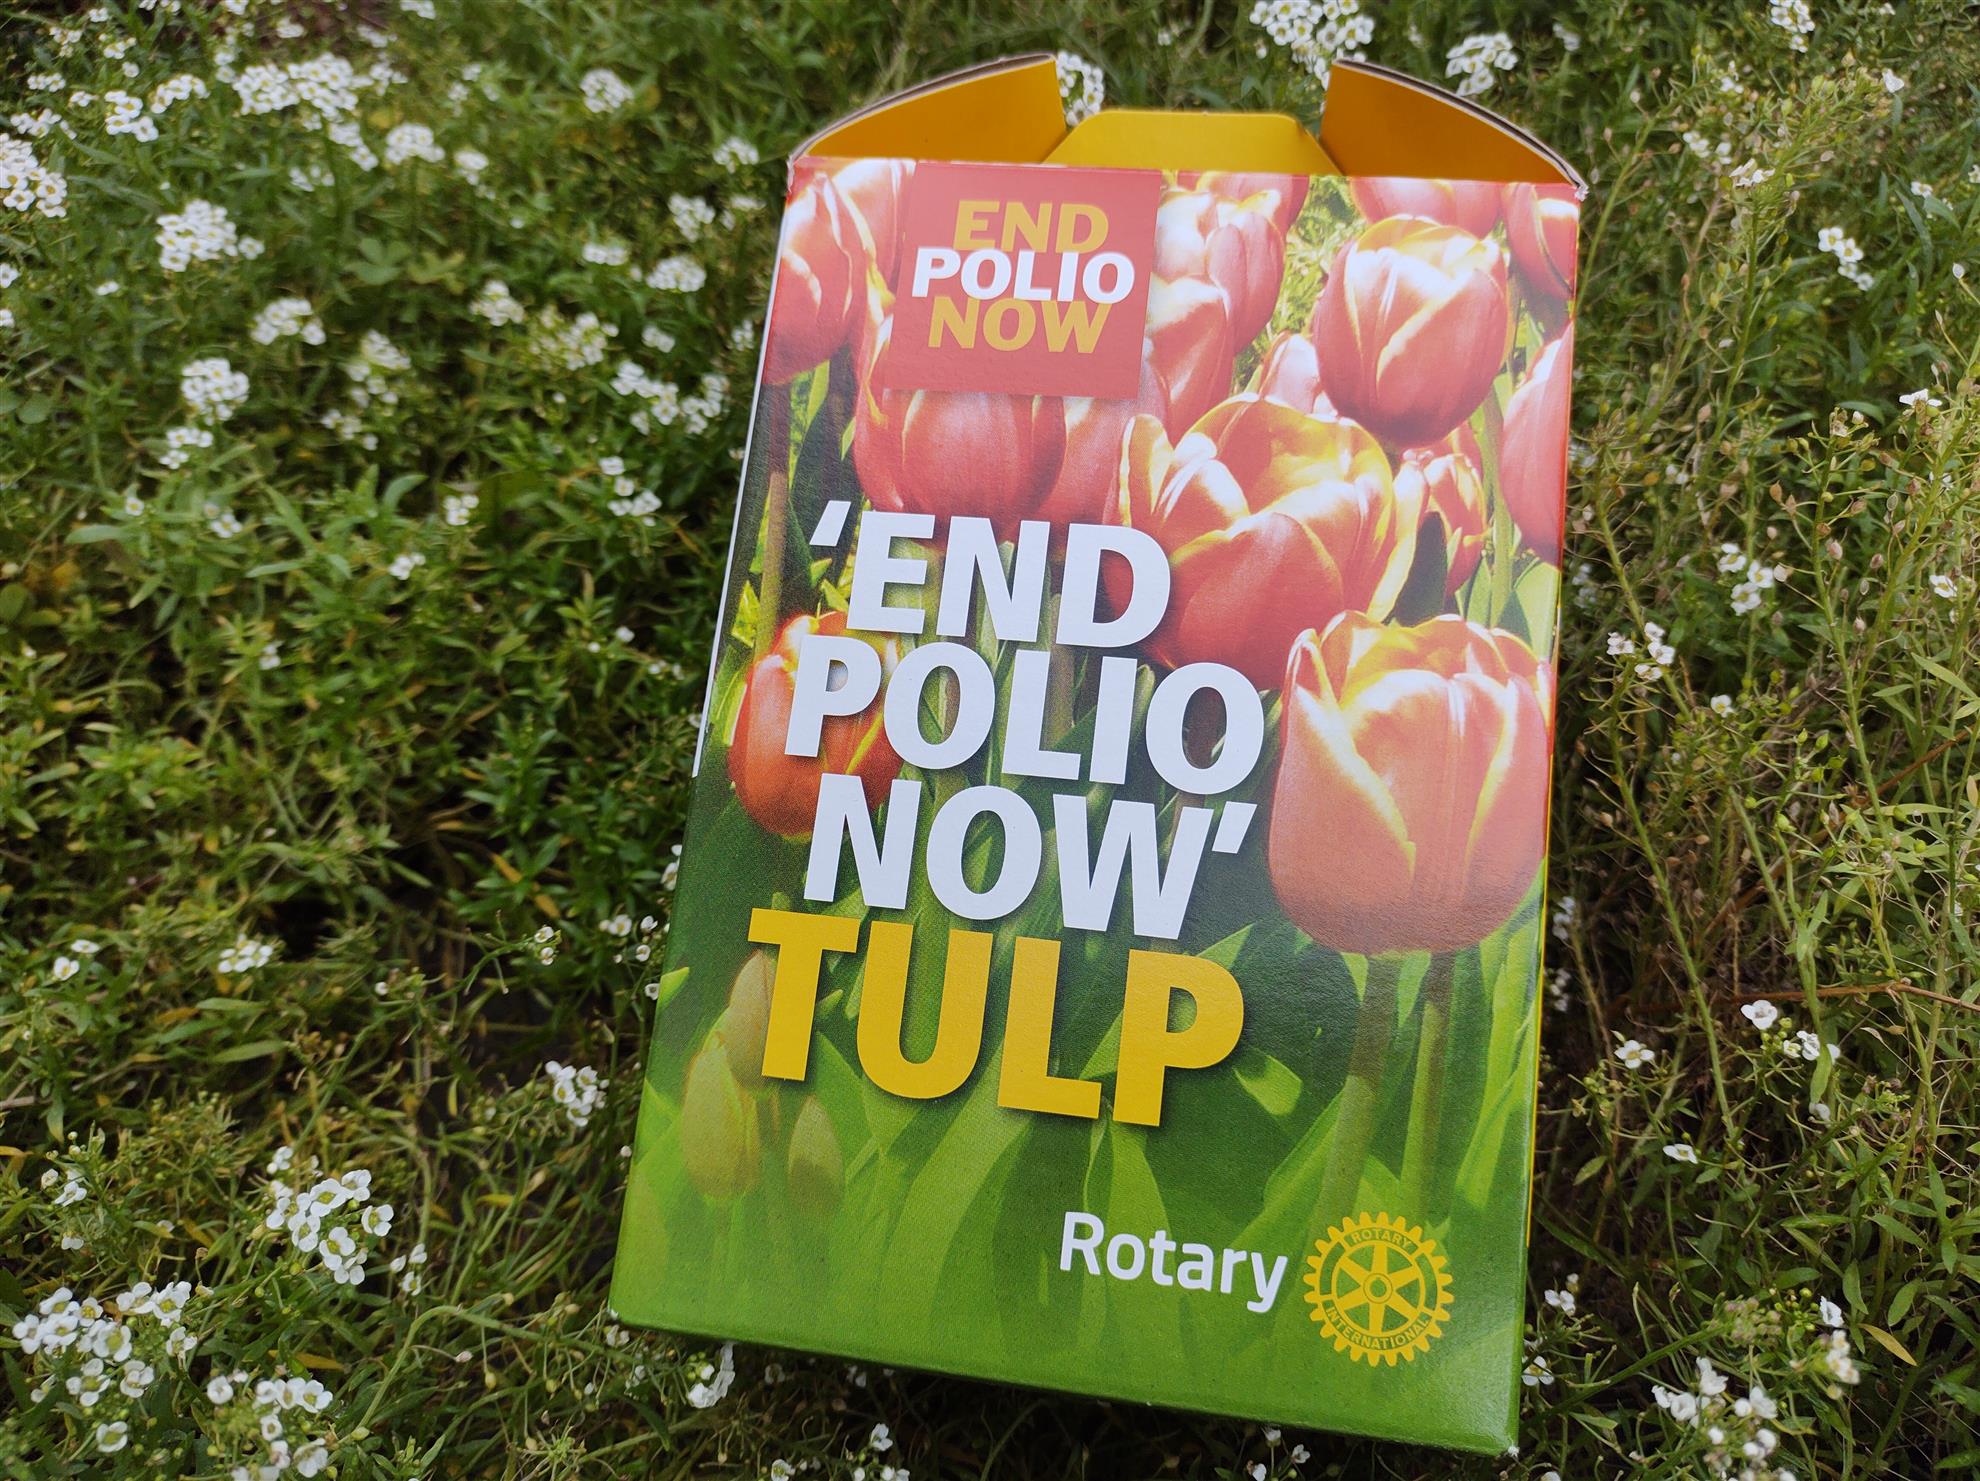 A box of tulip bulbs for red and yellow flowers. Text on box reads: End Polio Now Tulip